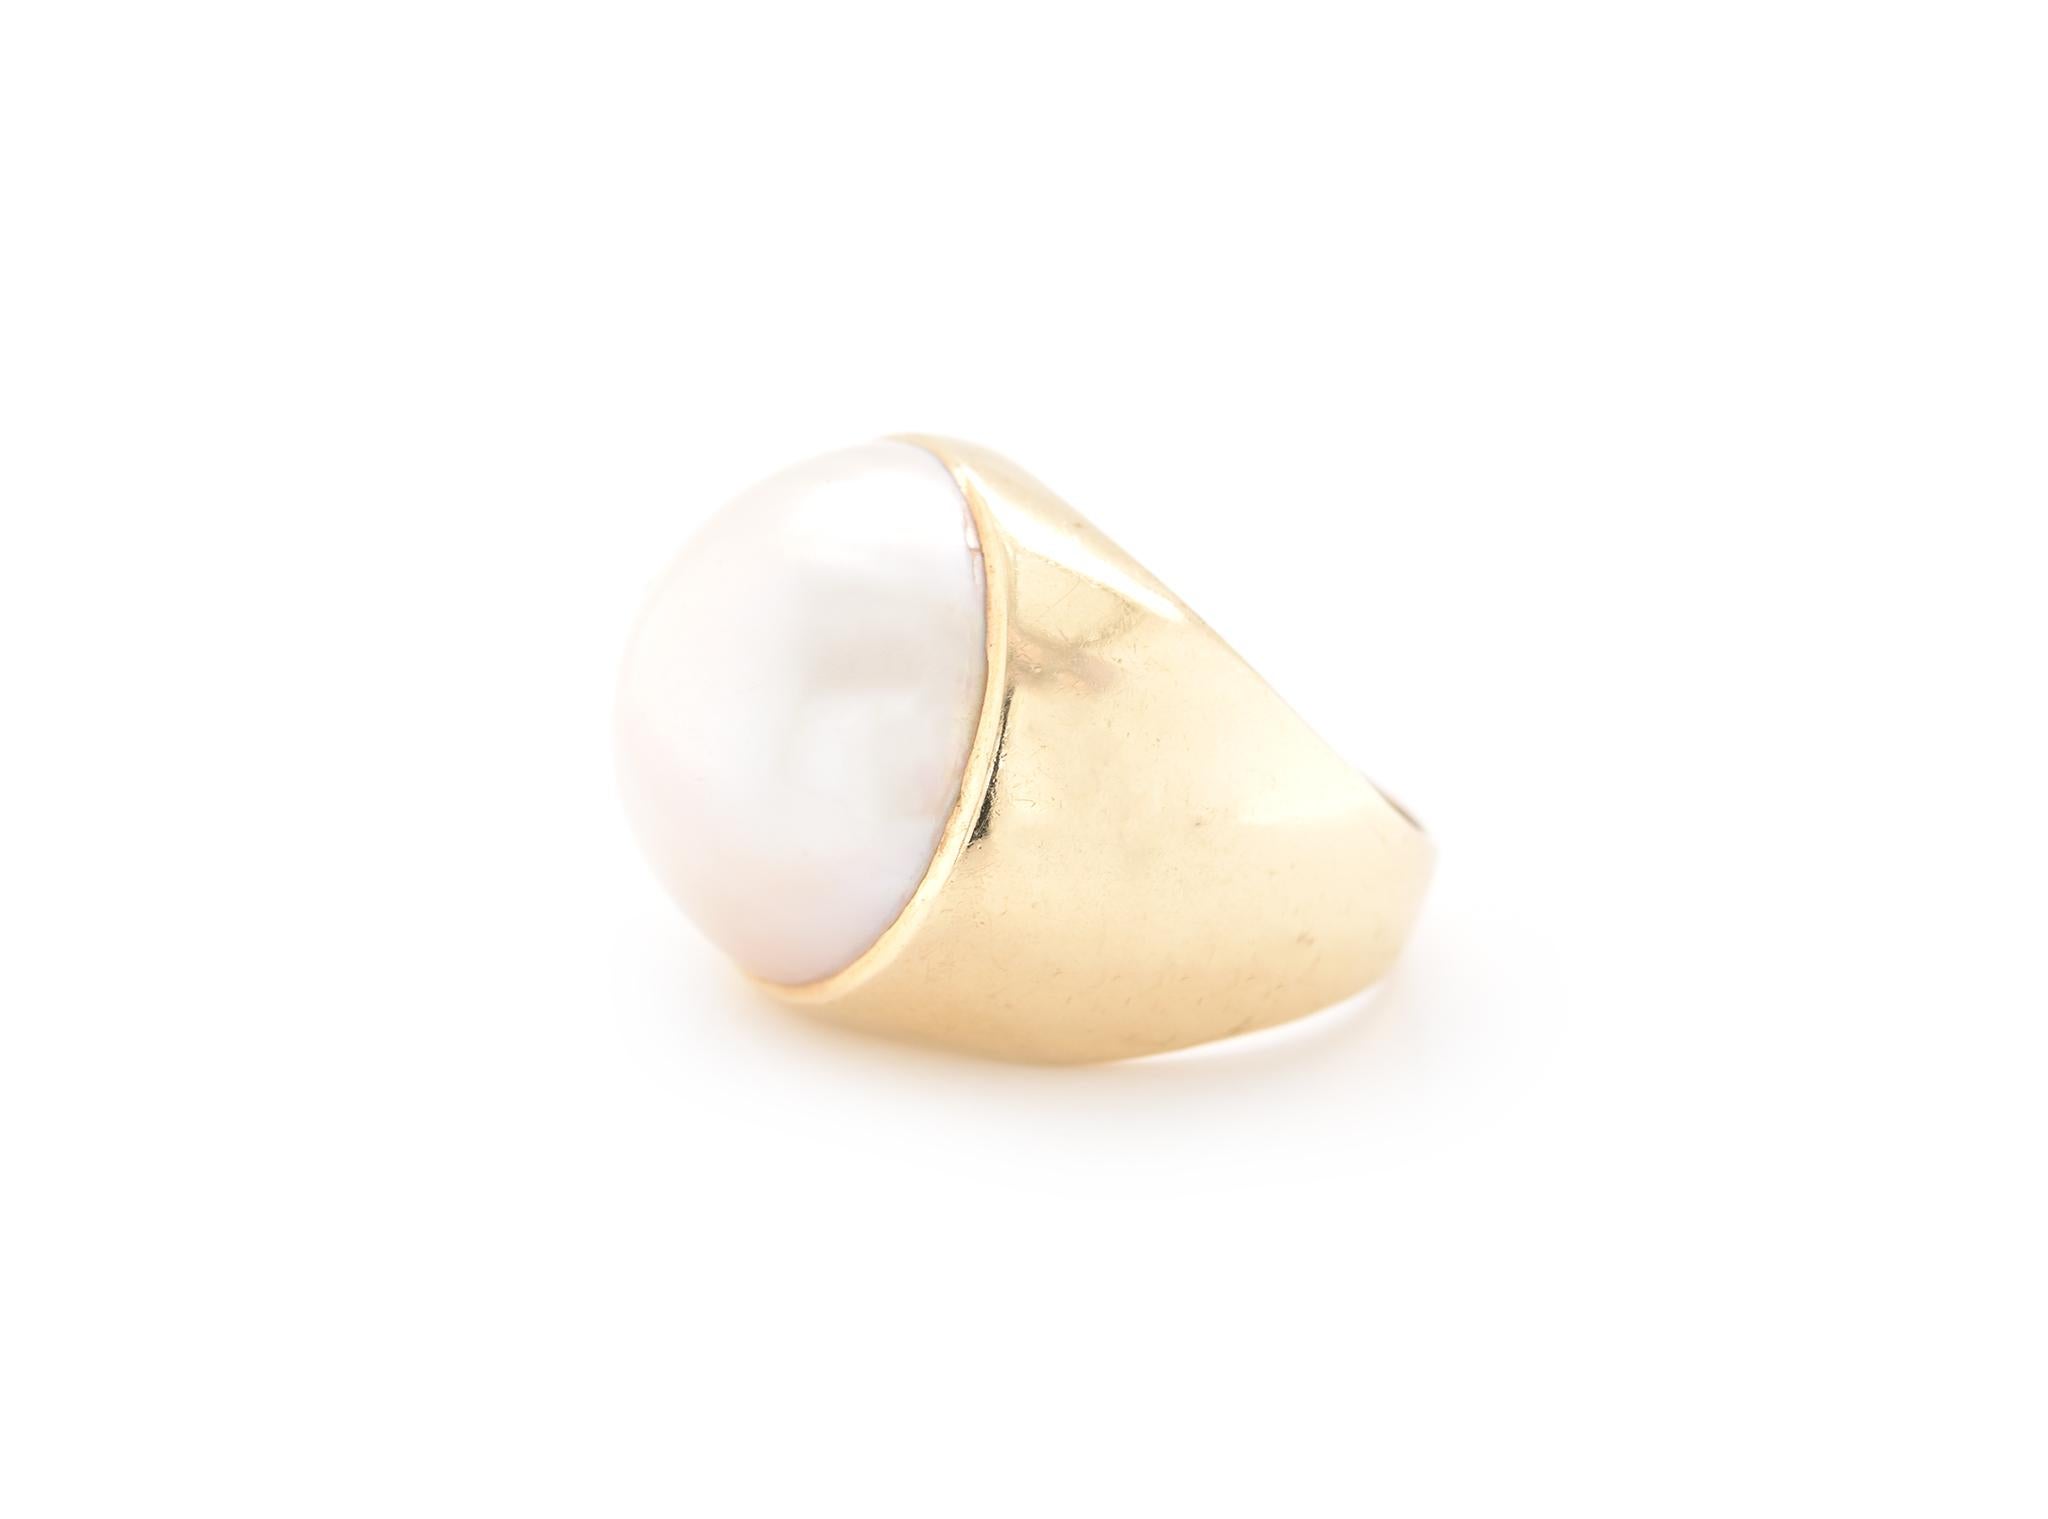 Designer: custom design
Material: 14k yellow gold
Pearl: Mabe pearl = 17.70mm
Ring Size: 6 ¾ (please allow two additional shipping days for sizing requests)
Dimensions: ring top measures 19mm wide 
Weight: 11.30 grams